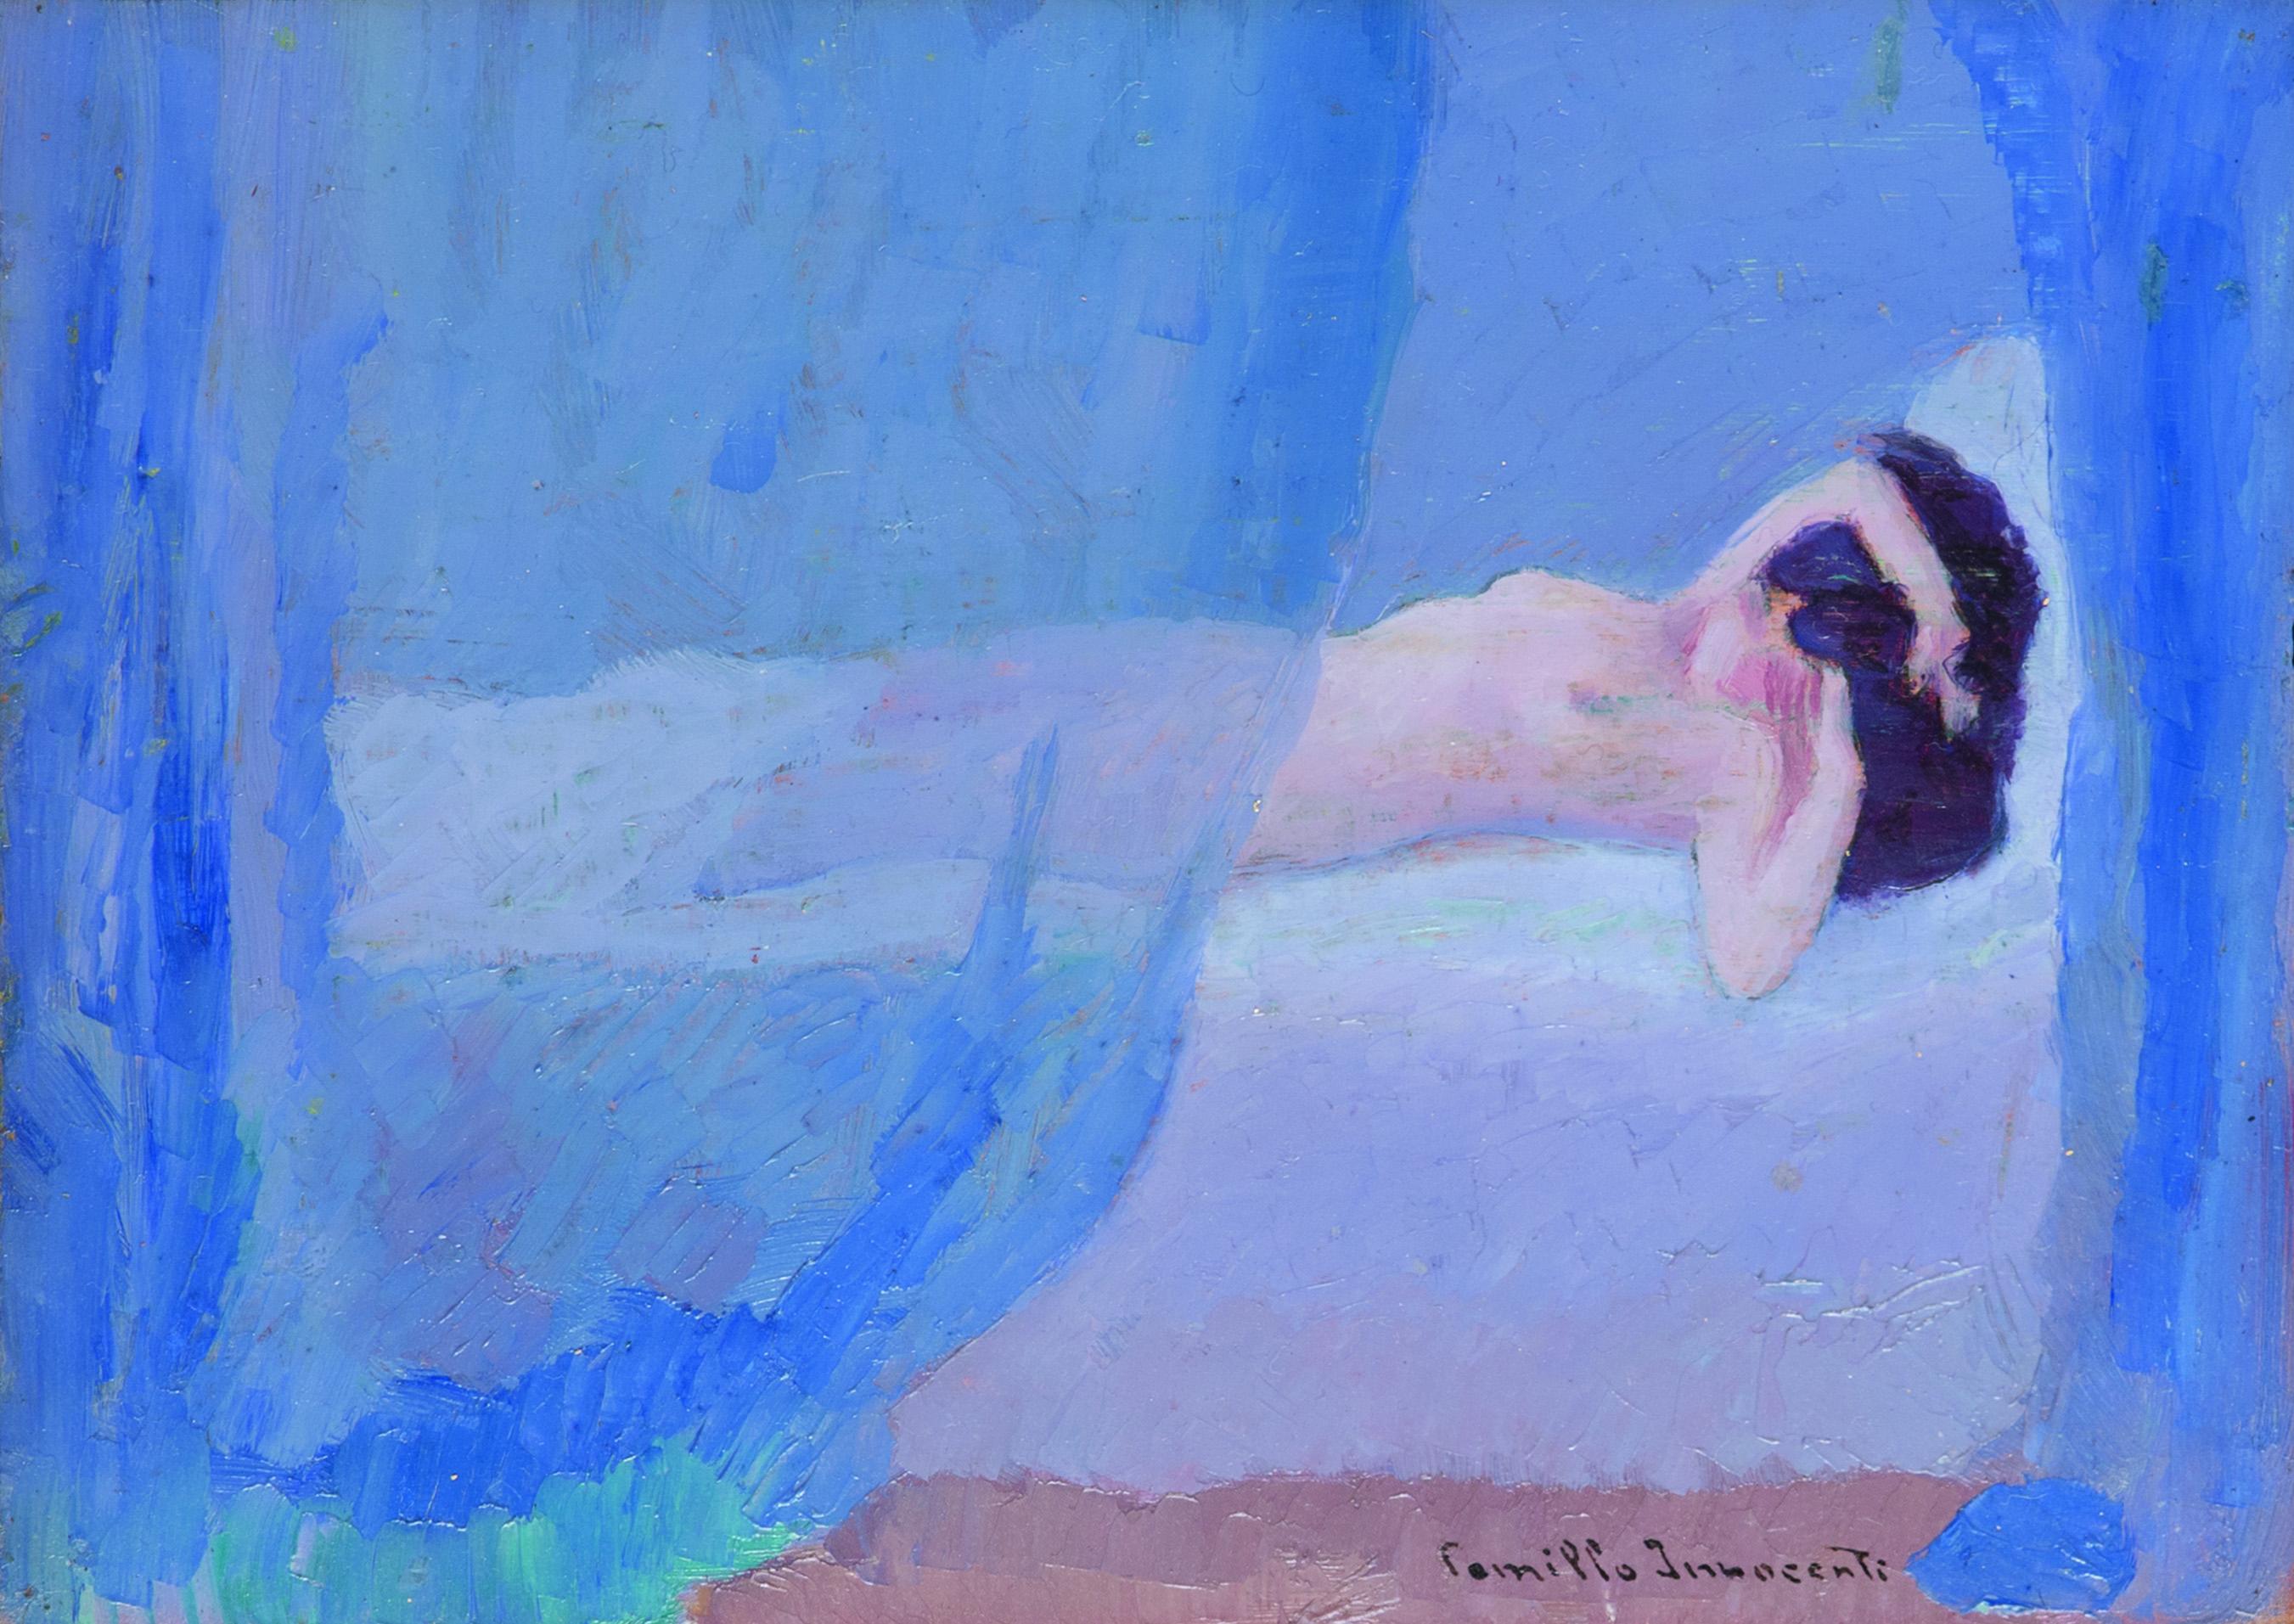 Female Nude. Sensual portrait in blue of a woman lying on a bed - Painting by Camillo Innocenti